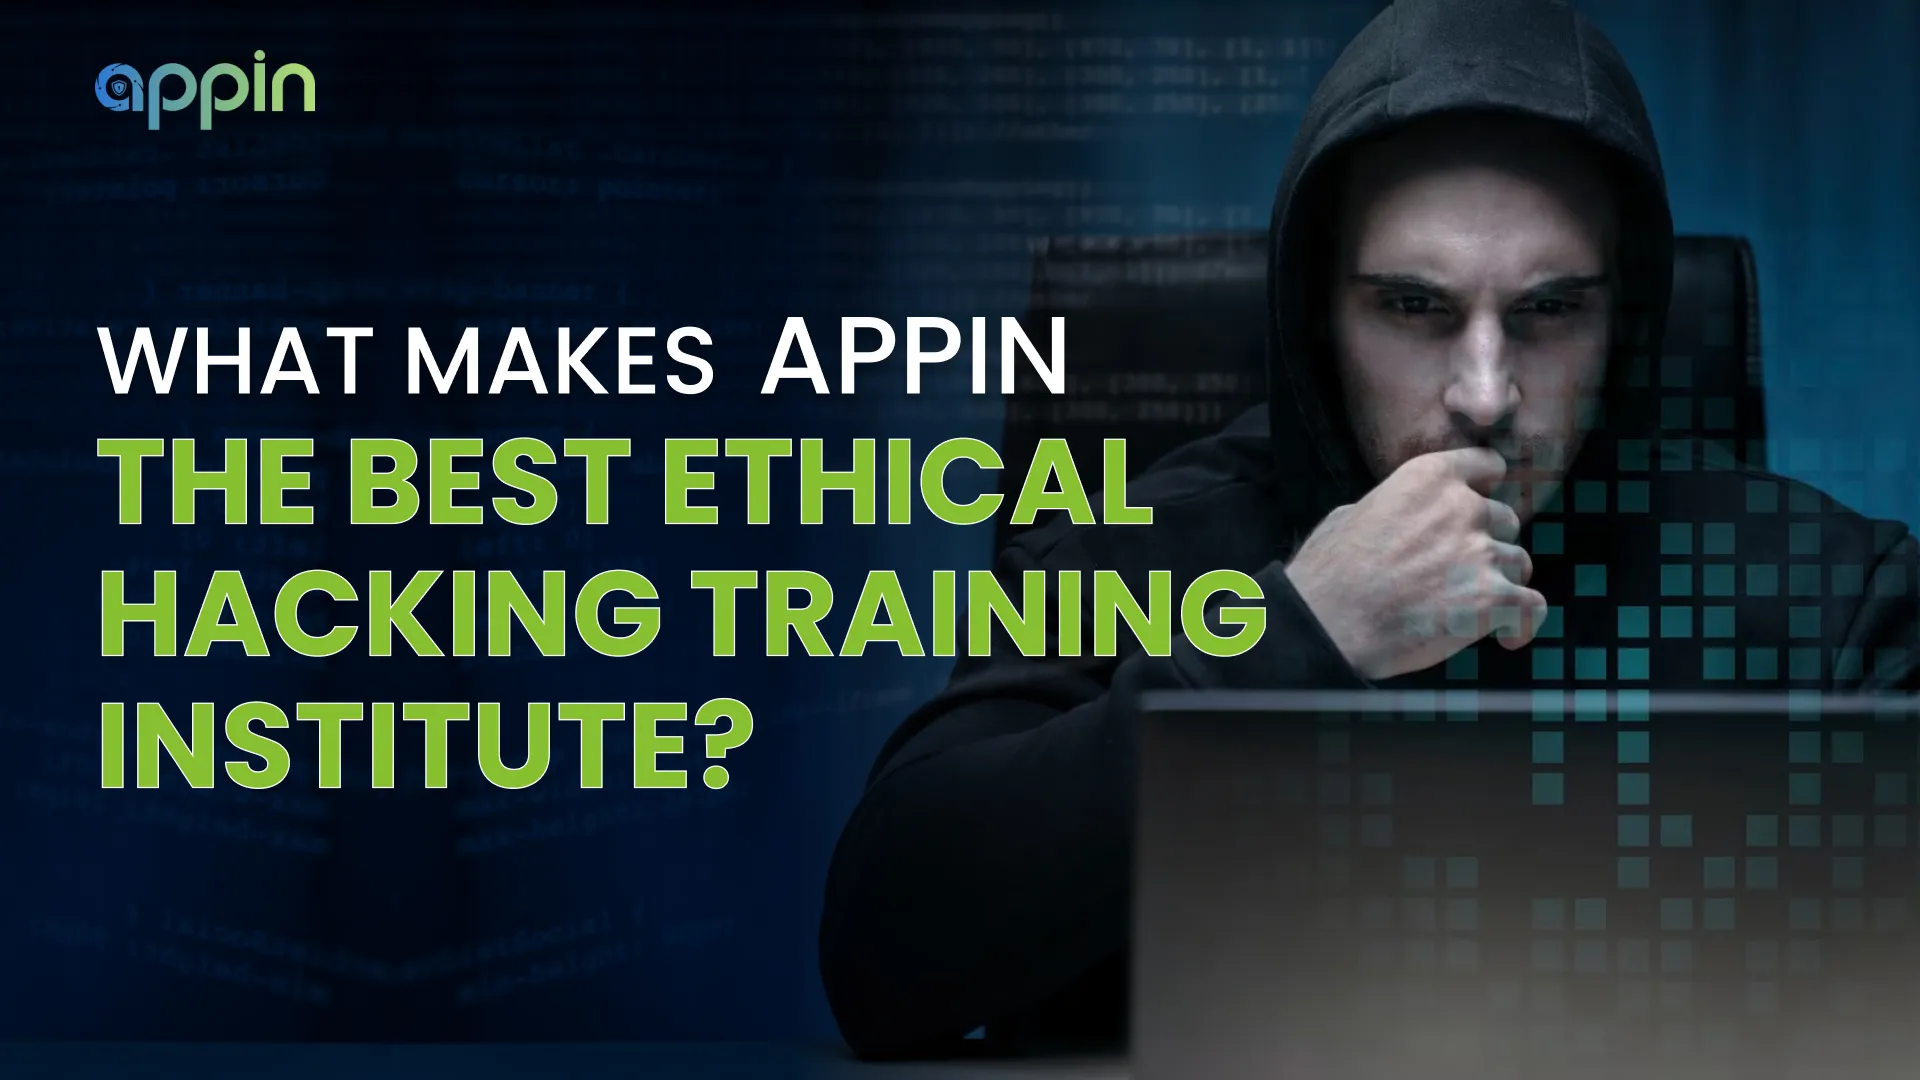 What makes appin the best ethical hacking training institute